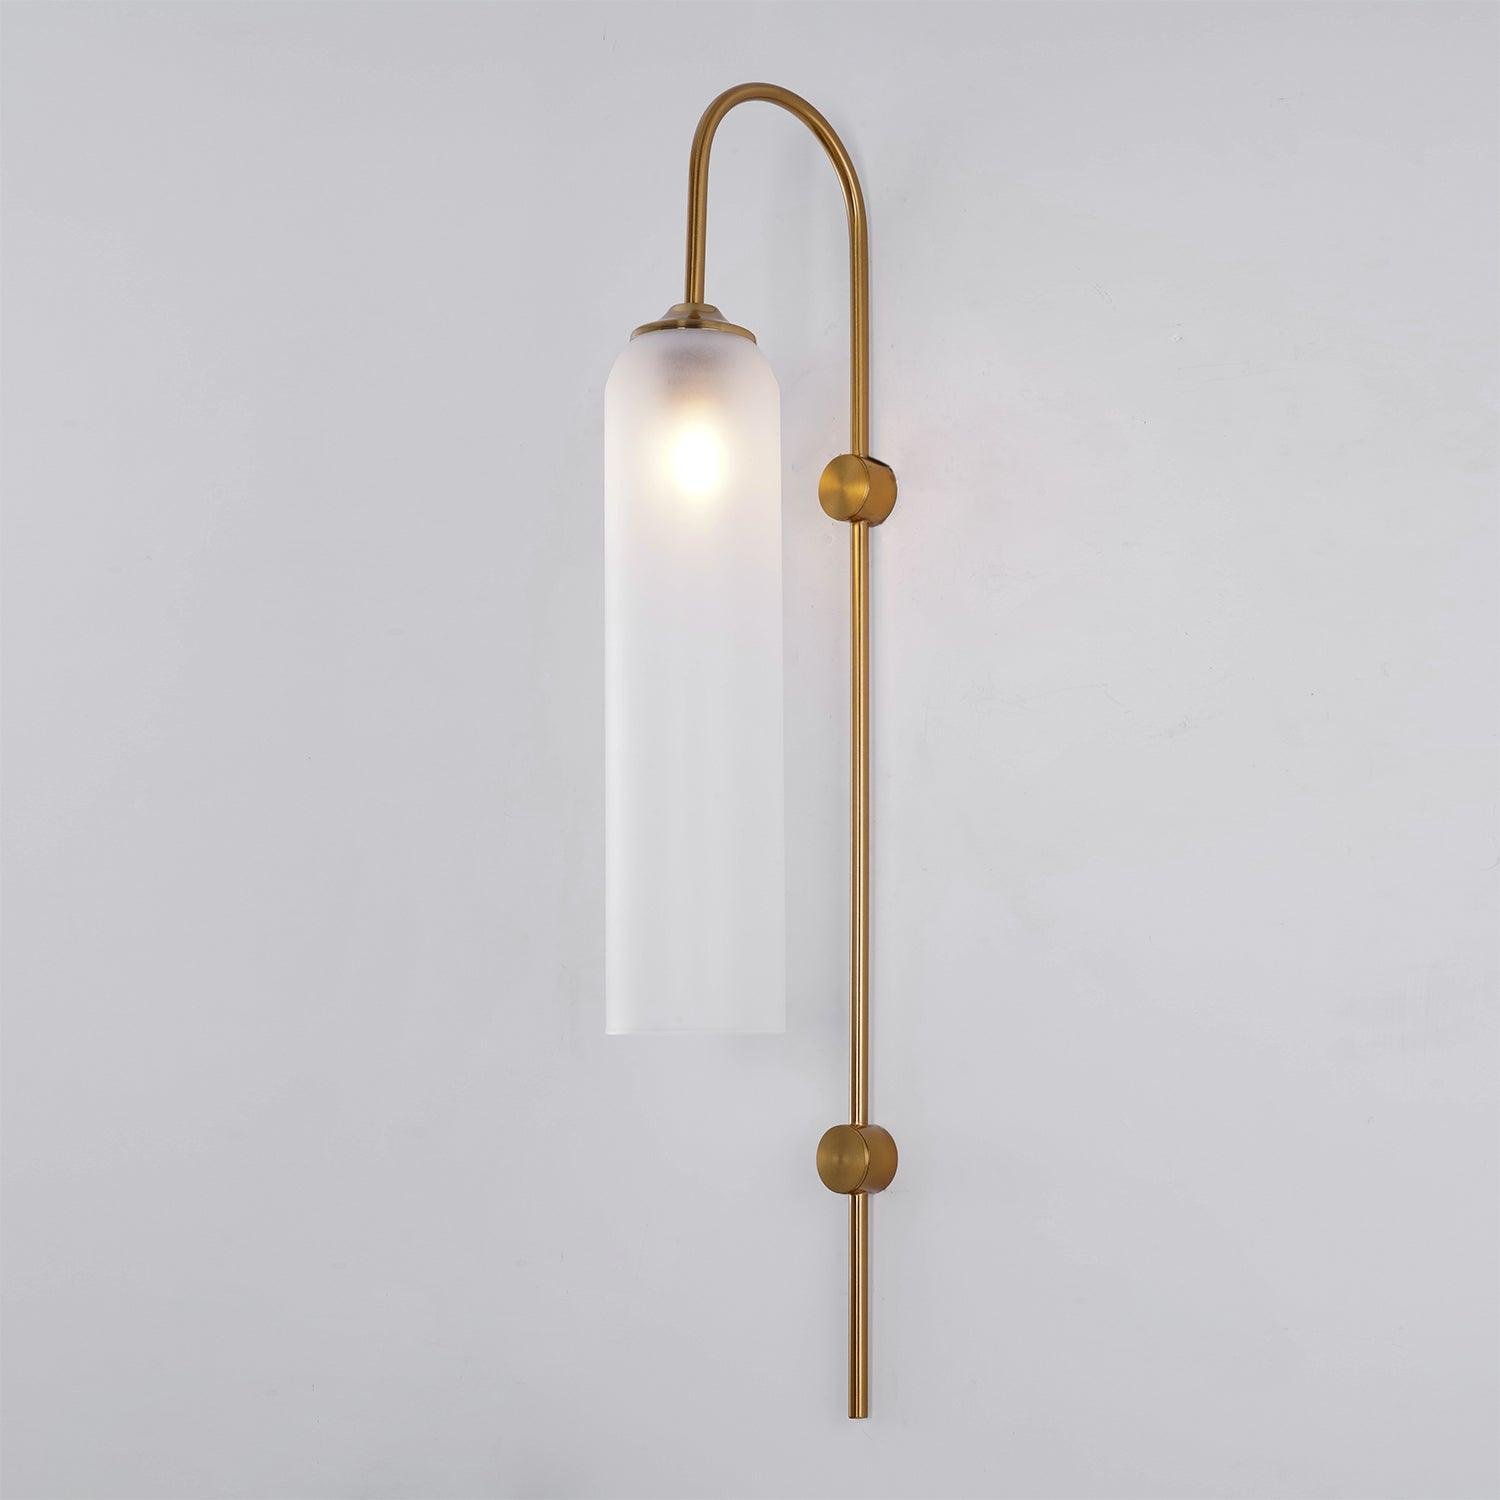 Modern Glass Wall Lamp W 18cm x H 80cm*2 , Gold , Frosted white